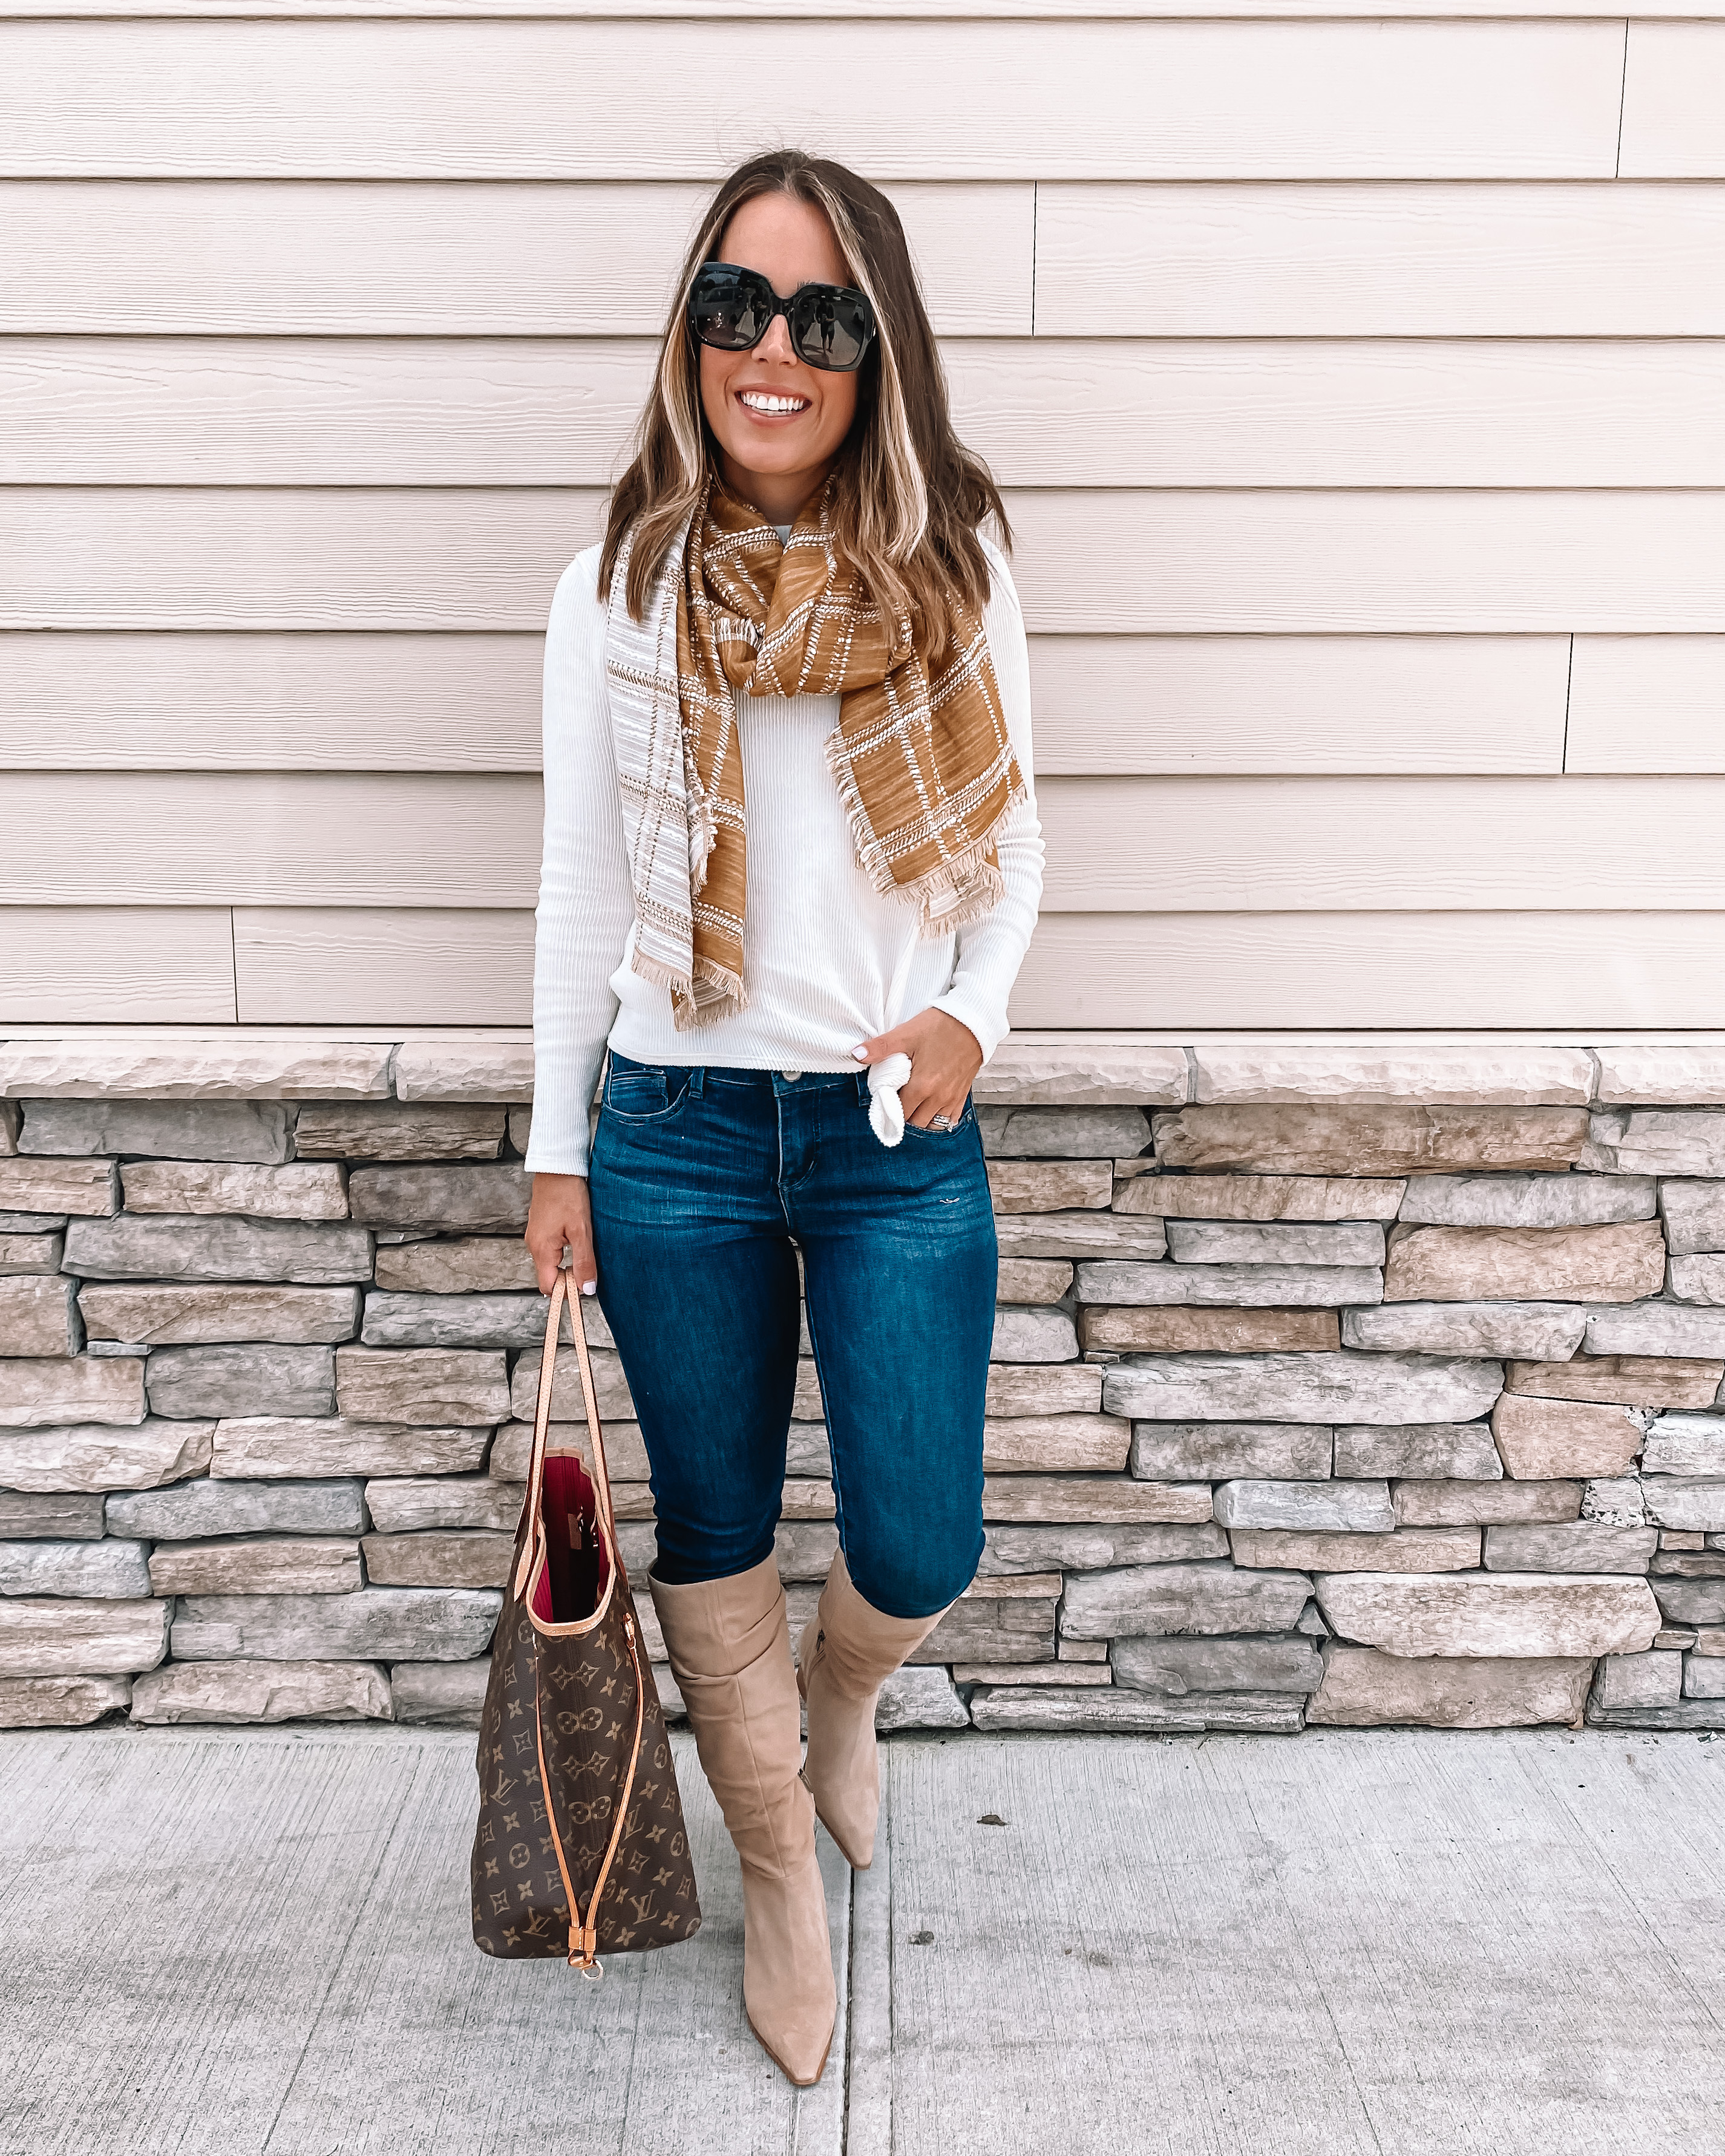 My Favorite Fall Accessory | MrsCasual